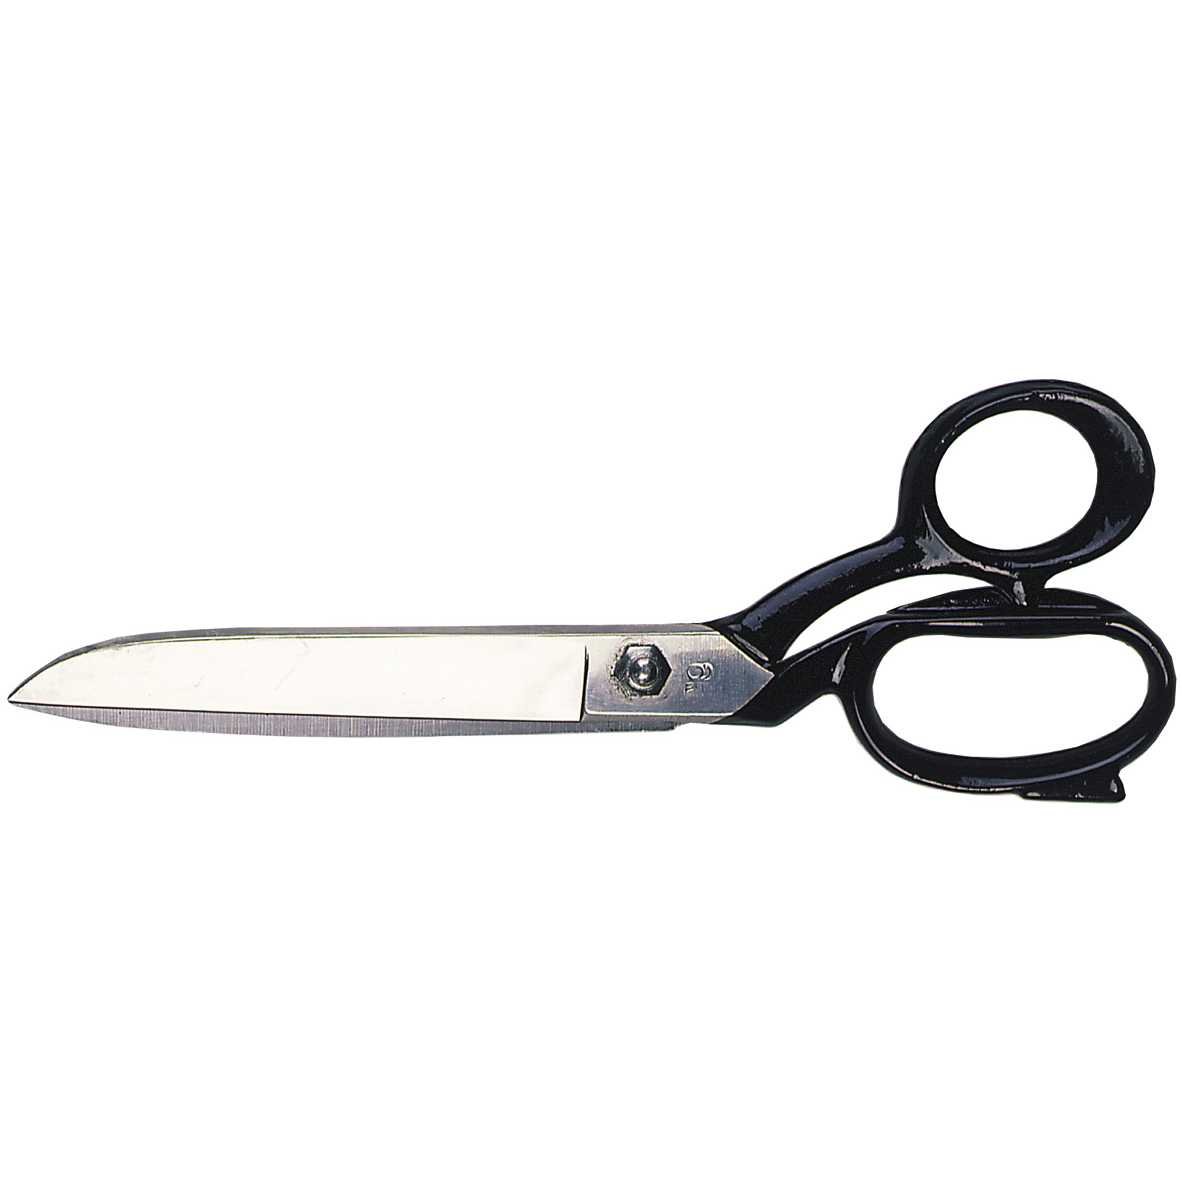 Industrial and professional shears D860-200